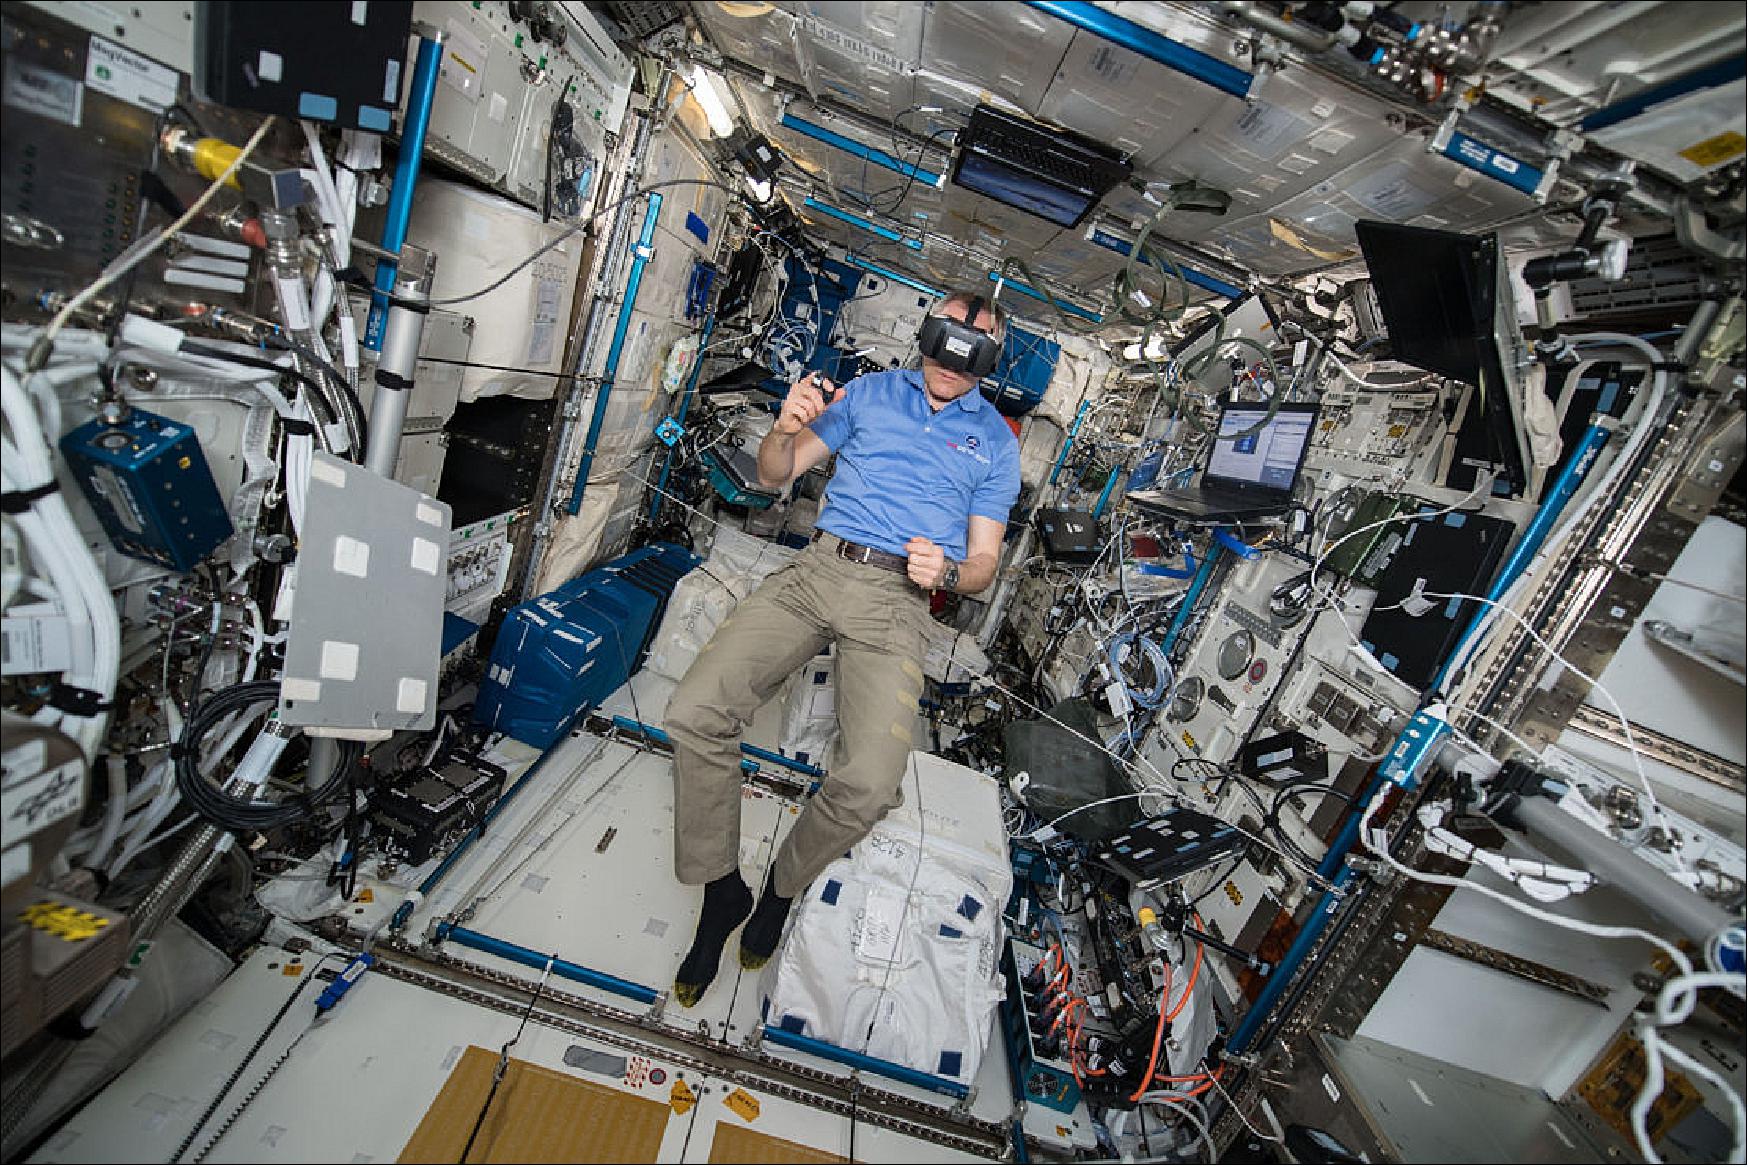 Figure 109: Human and robotic exploration image of the week. An astronaut during a timing test in the ISS (image credit: NASA)